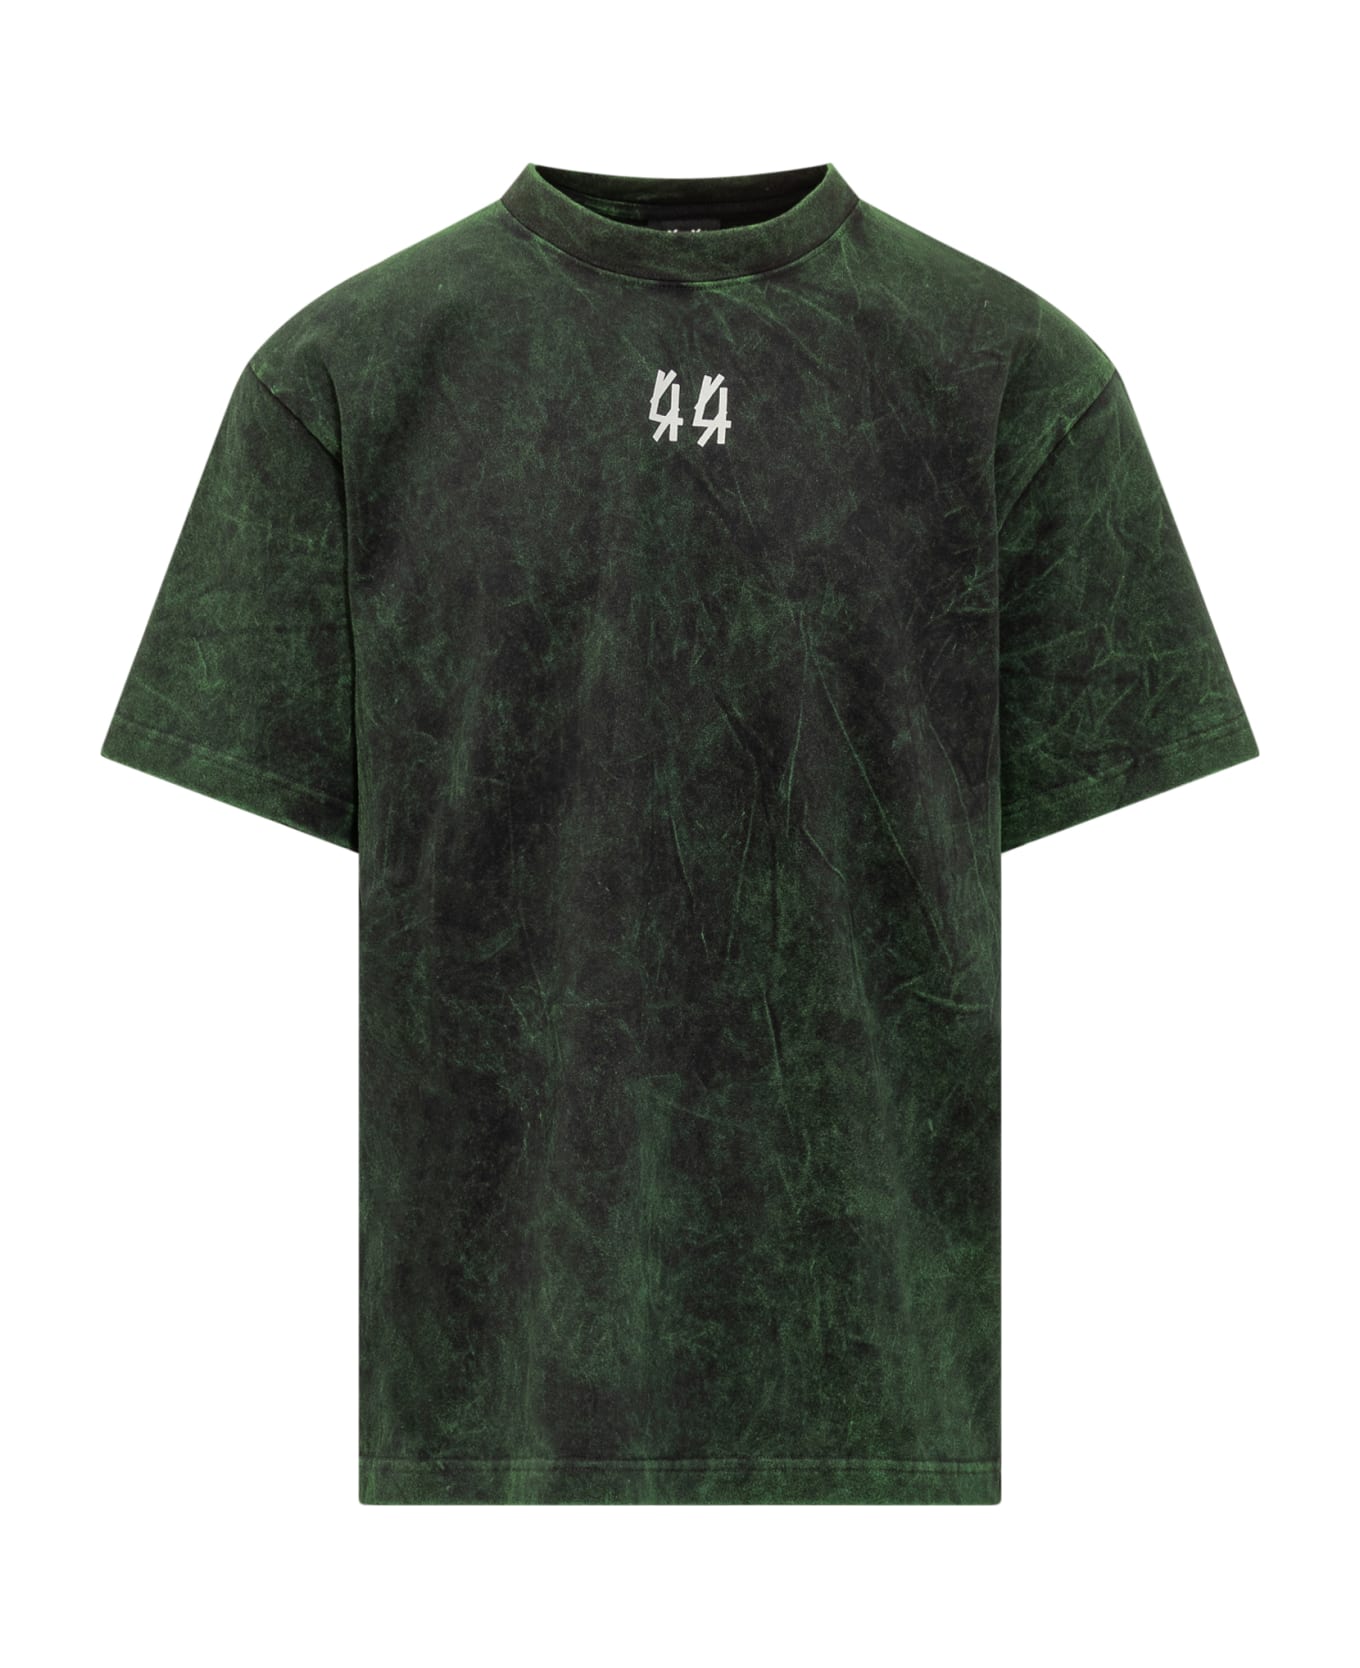 44 Label Group T-shirt With 44 Label Logo - BLACK-SOLID GREEN-44 SOLID